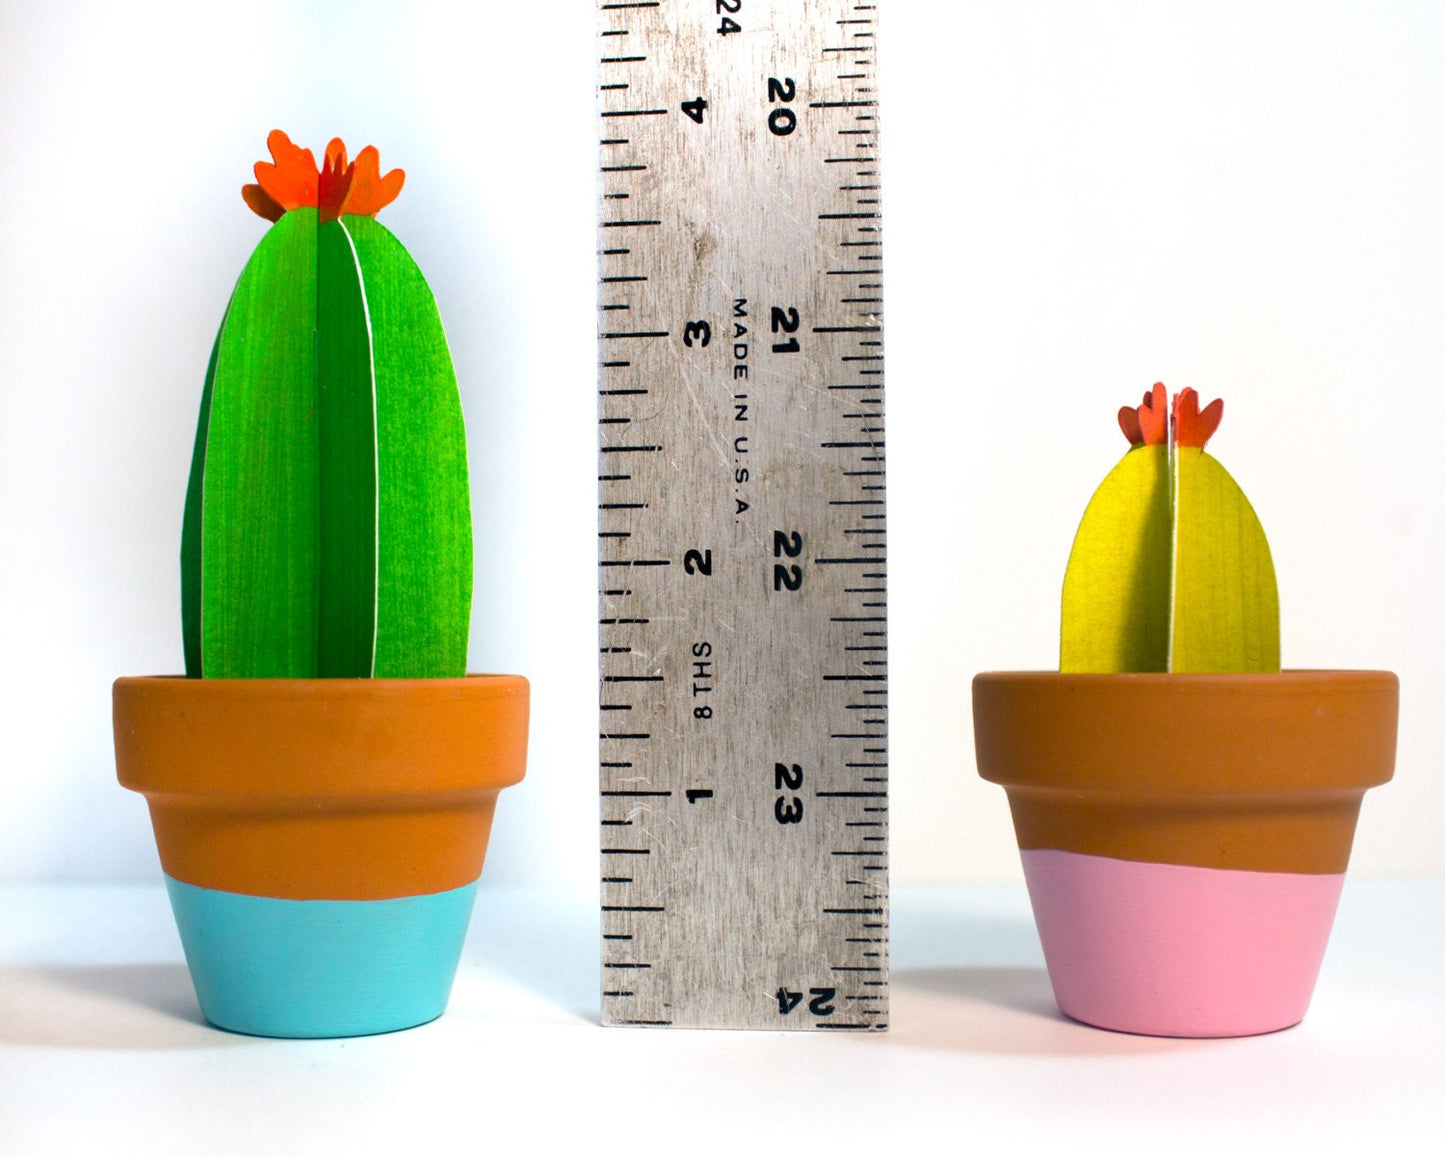 Cute single 3D paper blooming cacti in teracotta pots with ruler showing the heights ranging from 3-4 inches.